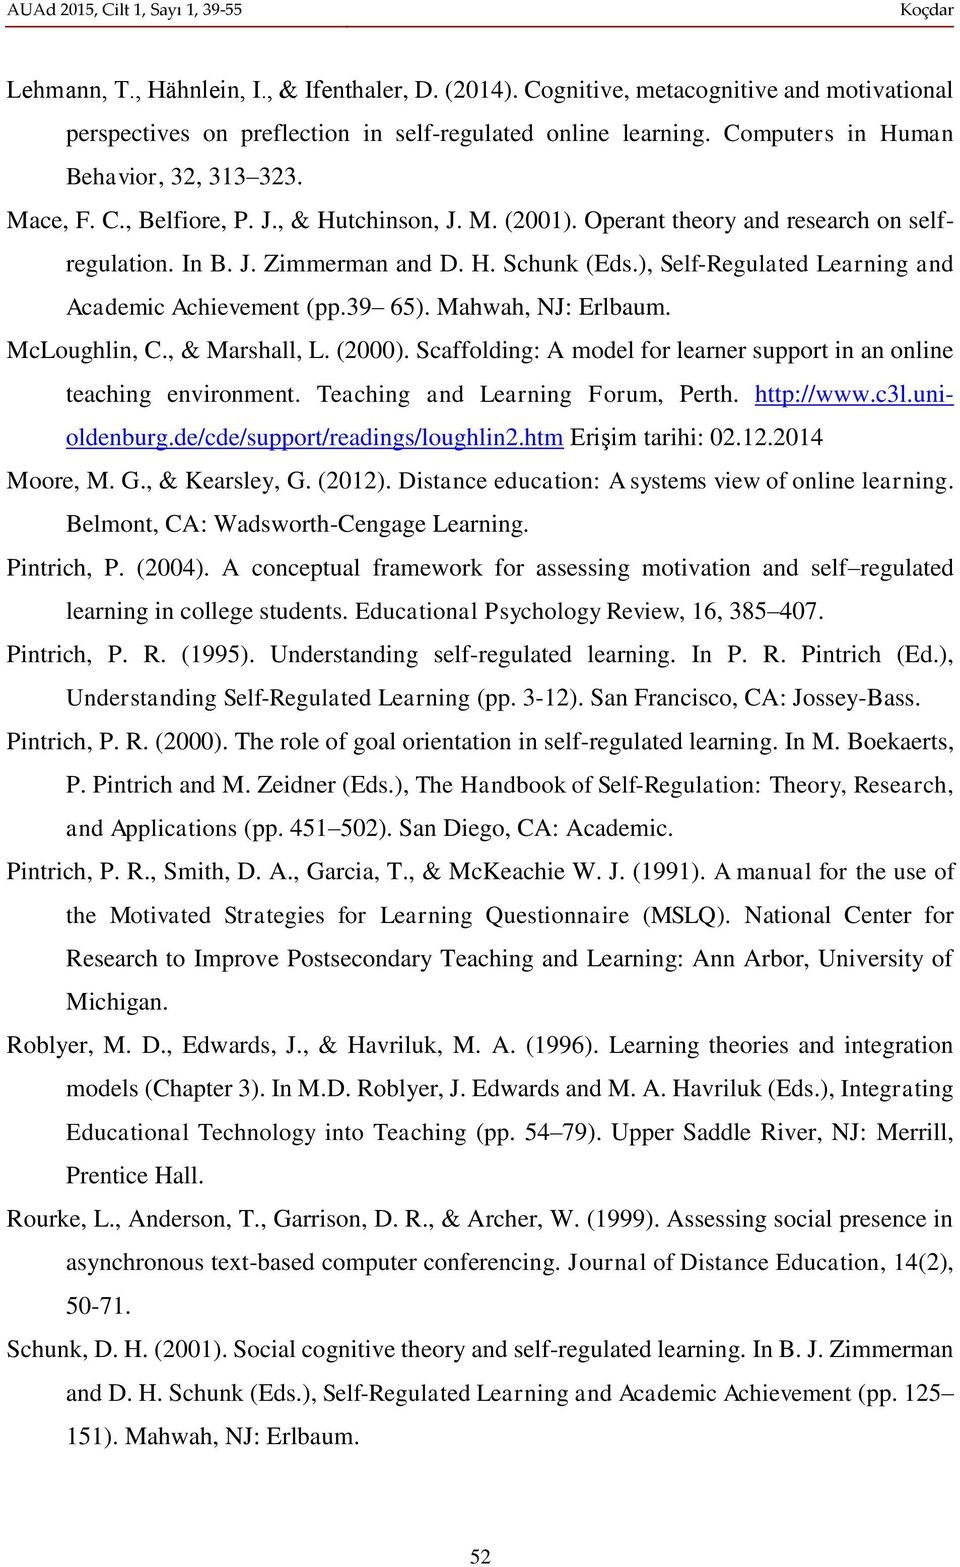 ), Self-Regulated Learning and Academic Achievement (pp.39 65). Mahwah, NJ: Erlbaum. McLoughlin, C., & Marshall, L. (2000). Scaffolding: A model for learner support in an online teaching environment.